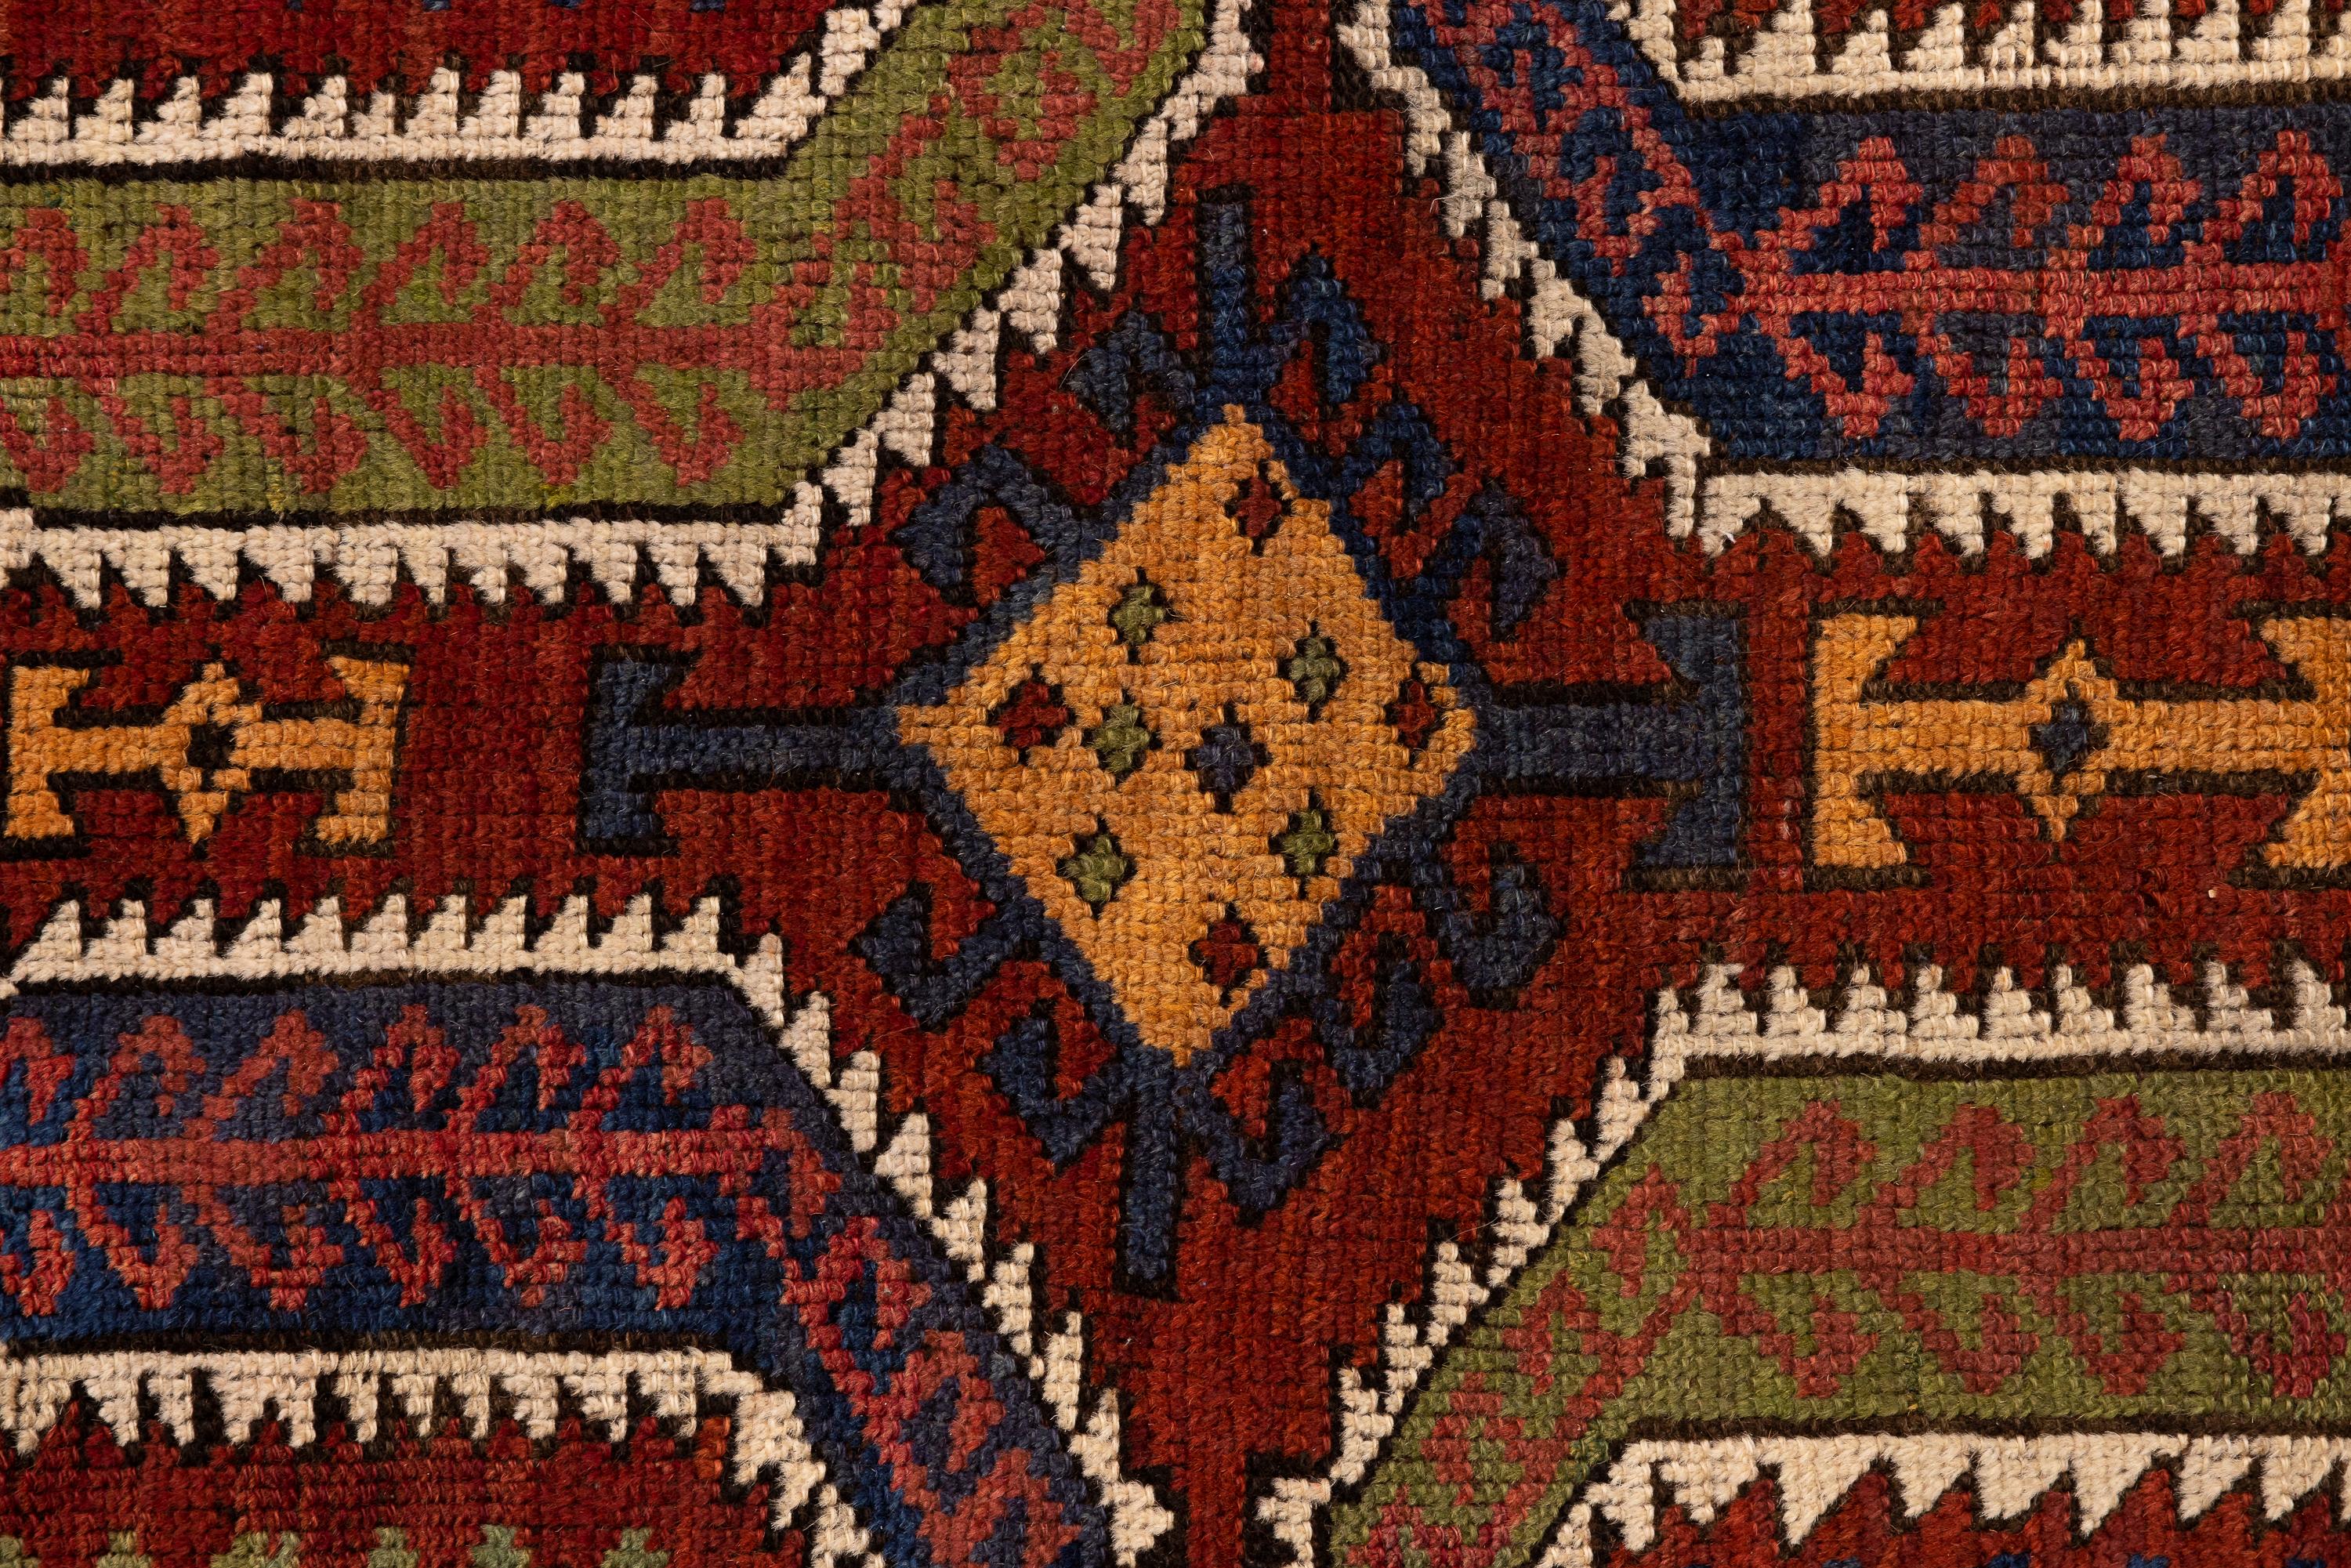 Konya – Central Anatolia

Antique Konya Yastik with solid and vibrant colours. The rug features an intricate design with slightly asymmetrical geometric patterns. The predominant colours are earthy red, blue, yellow, and green. The design details